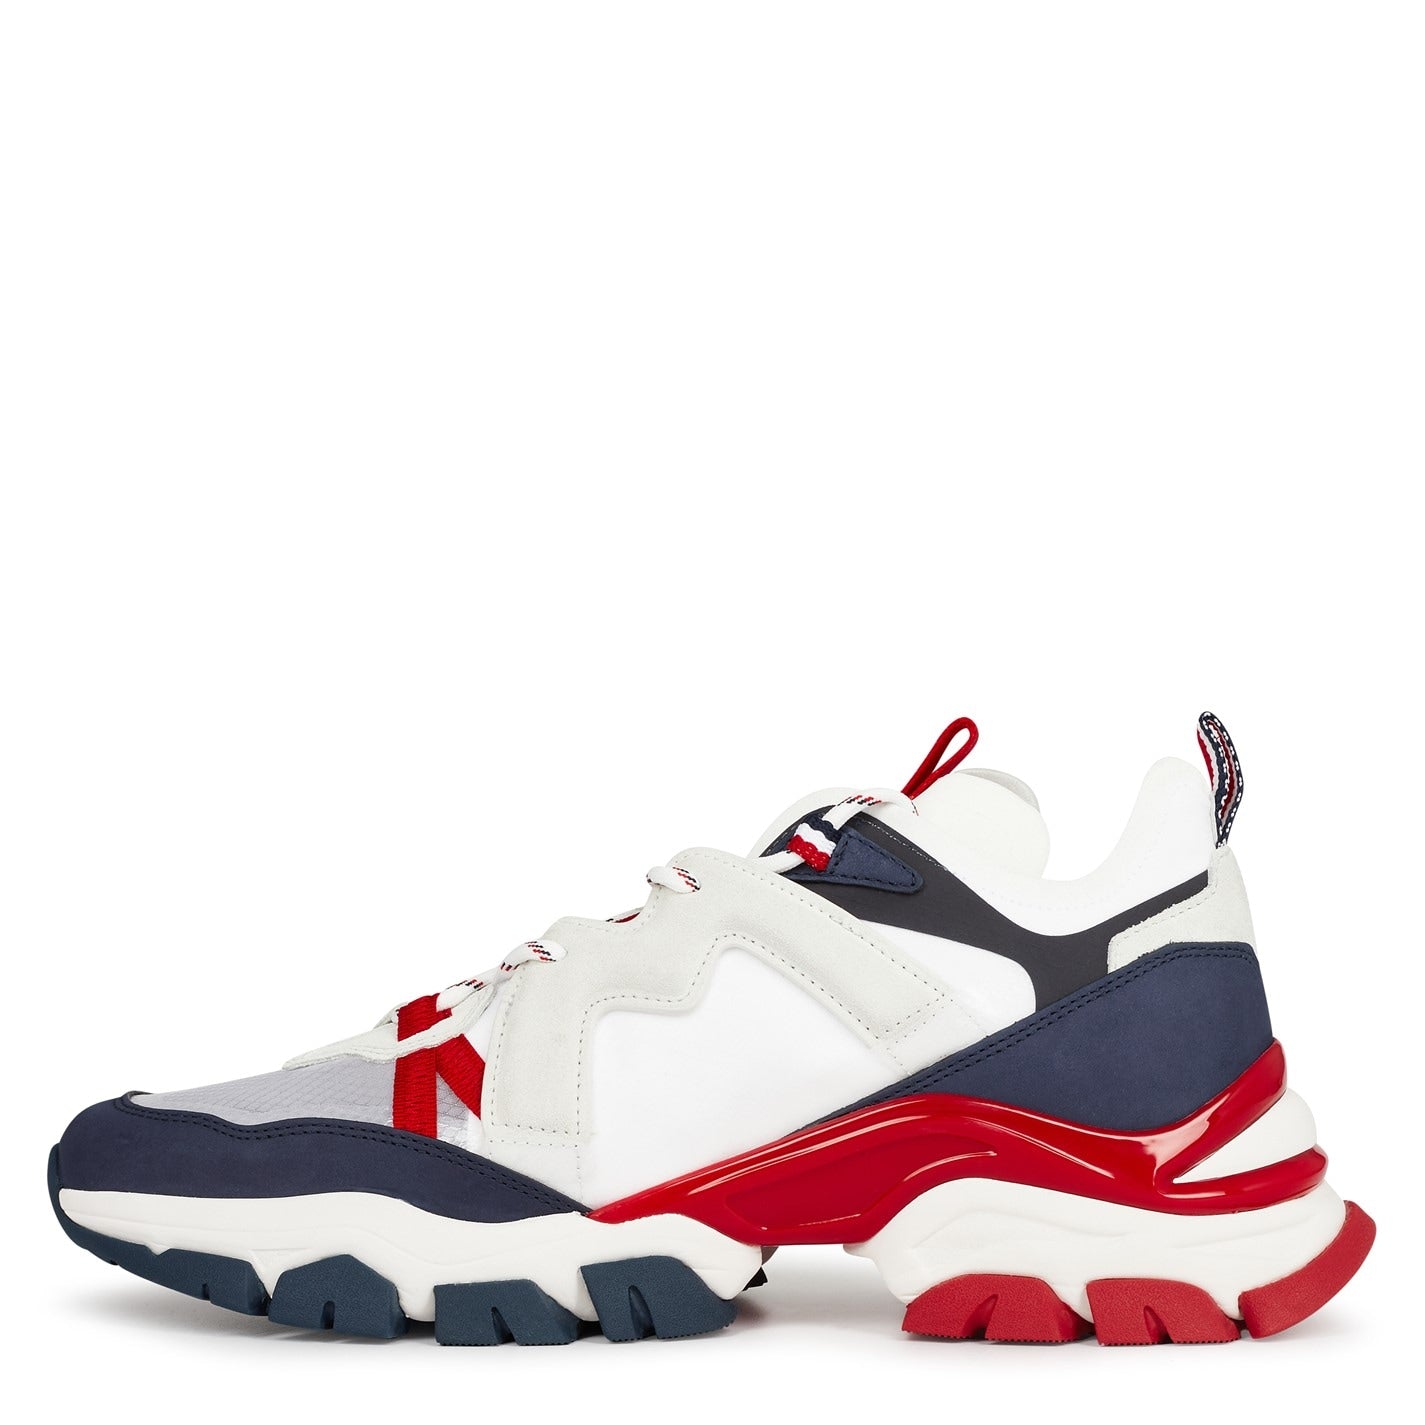 Moncler Leave No Trace Sneakers - DANYOUNGUK